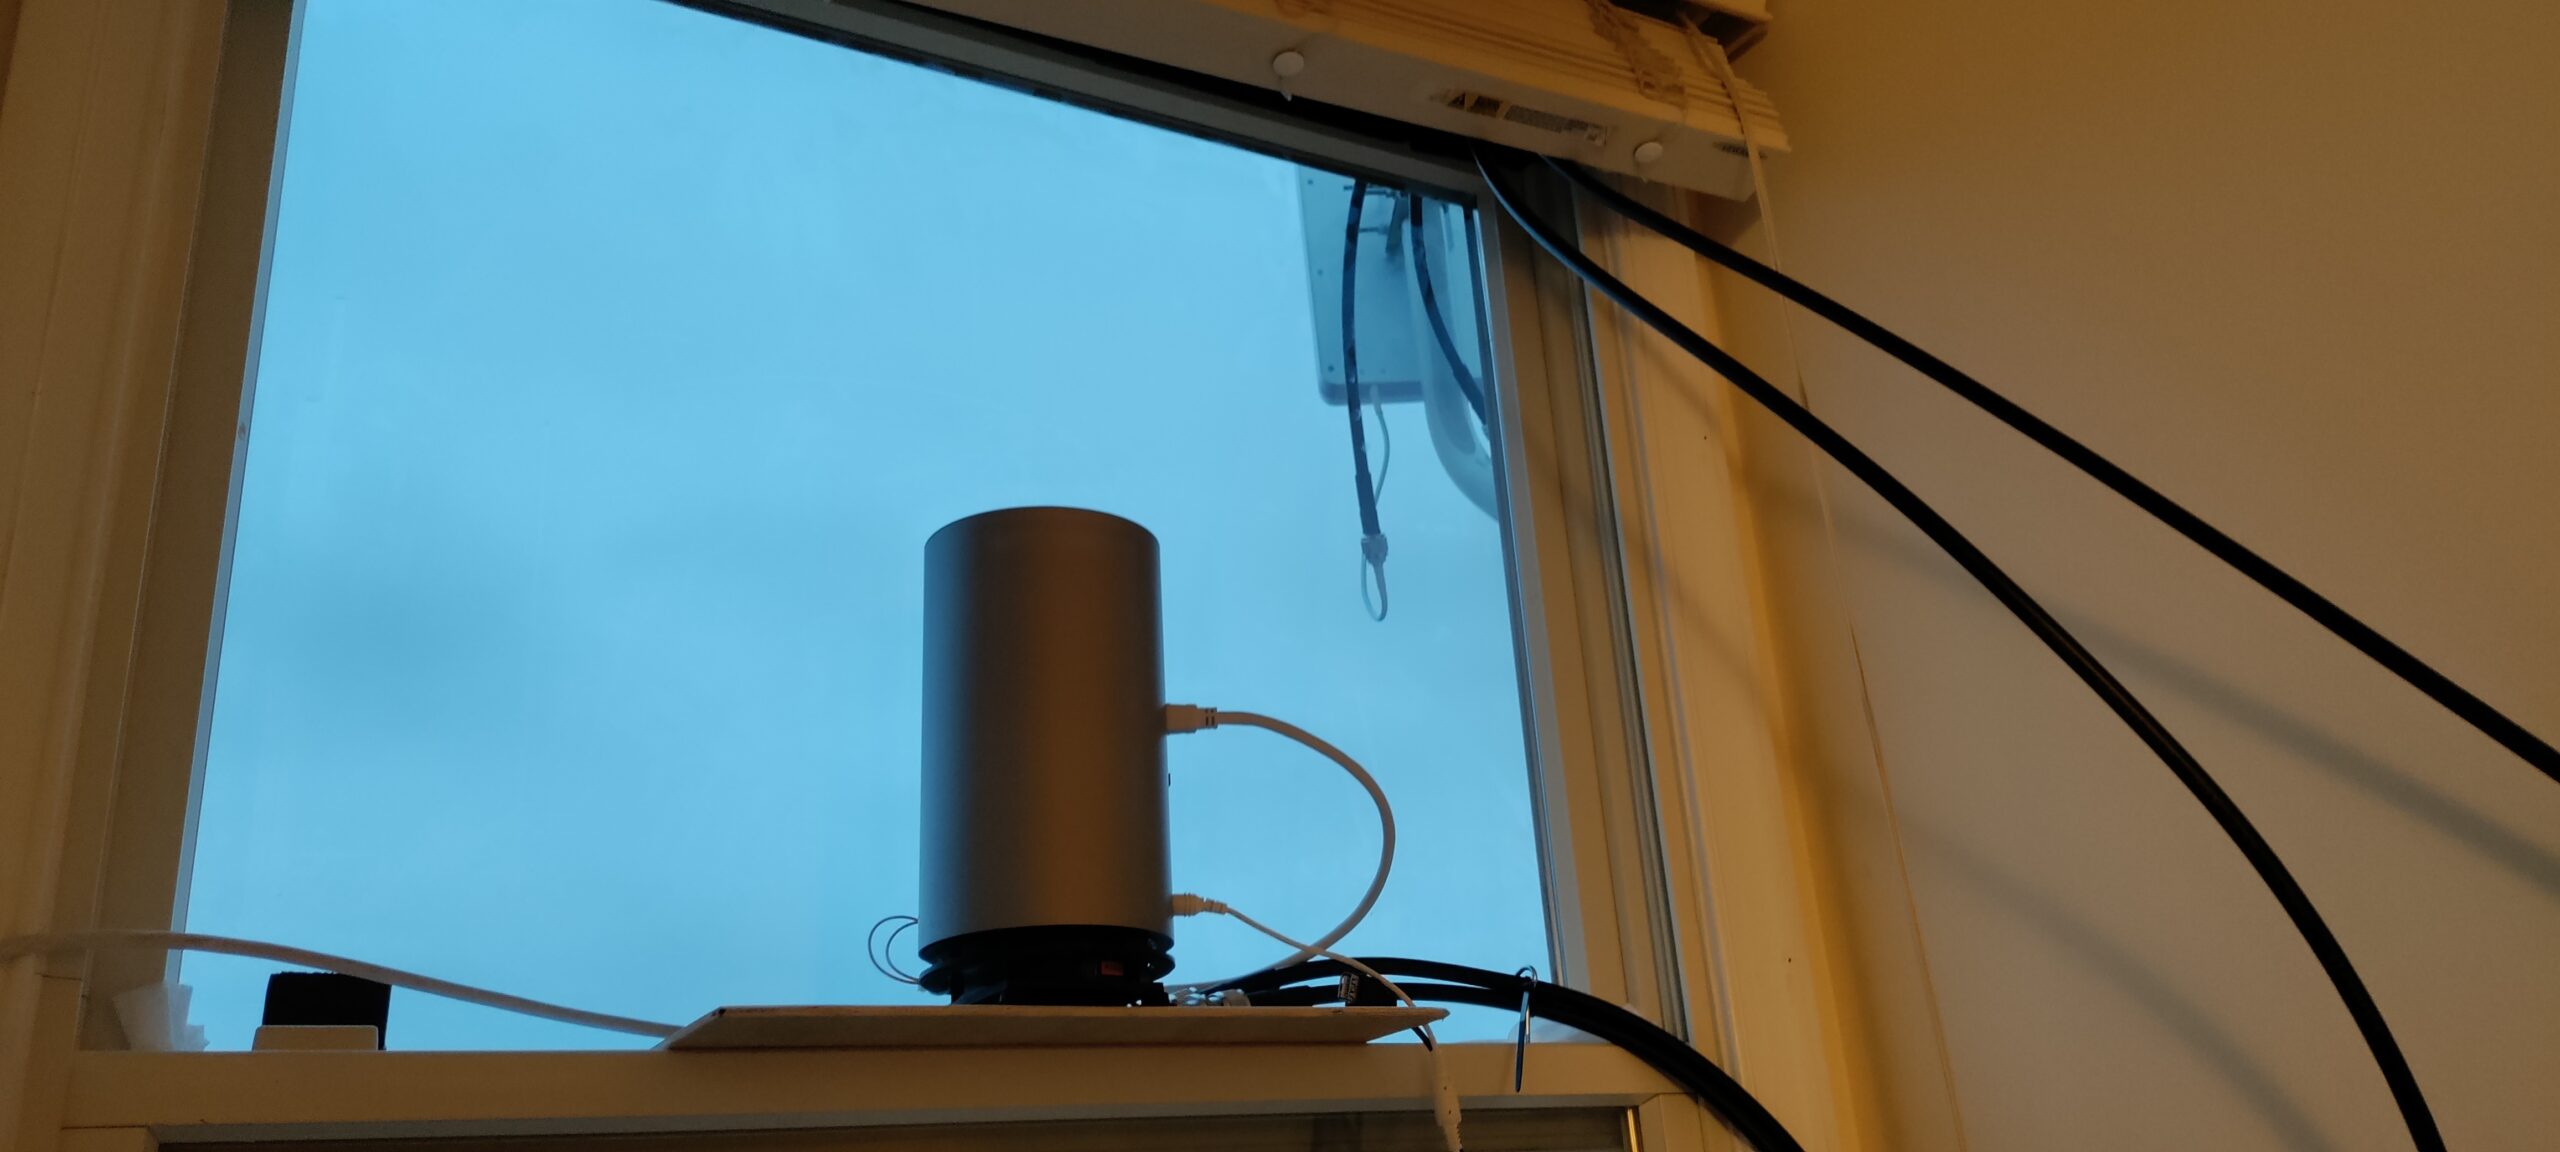 T mobile home internet antenna